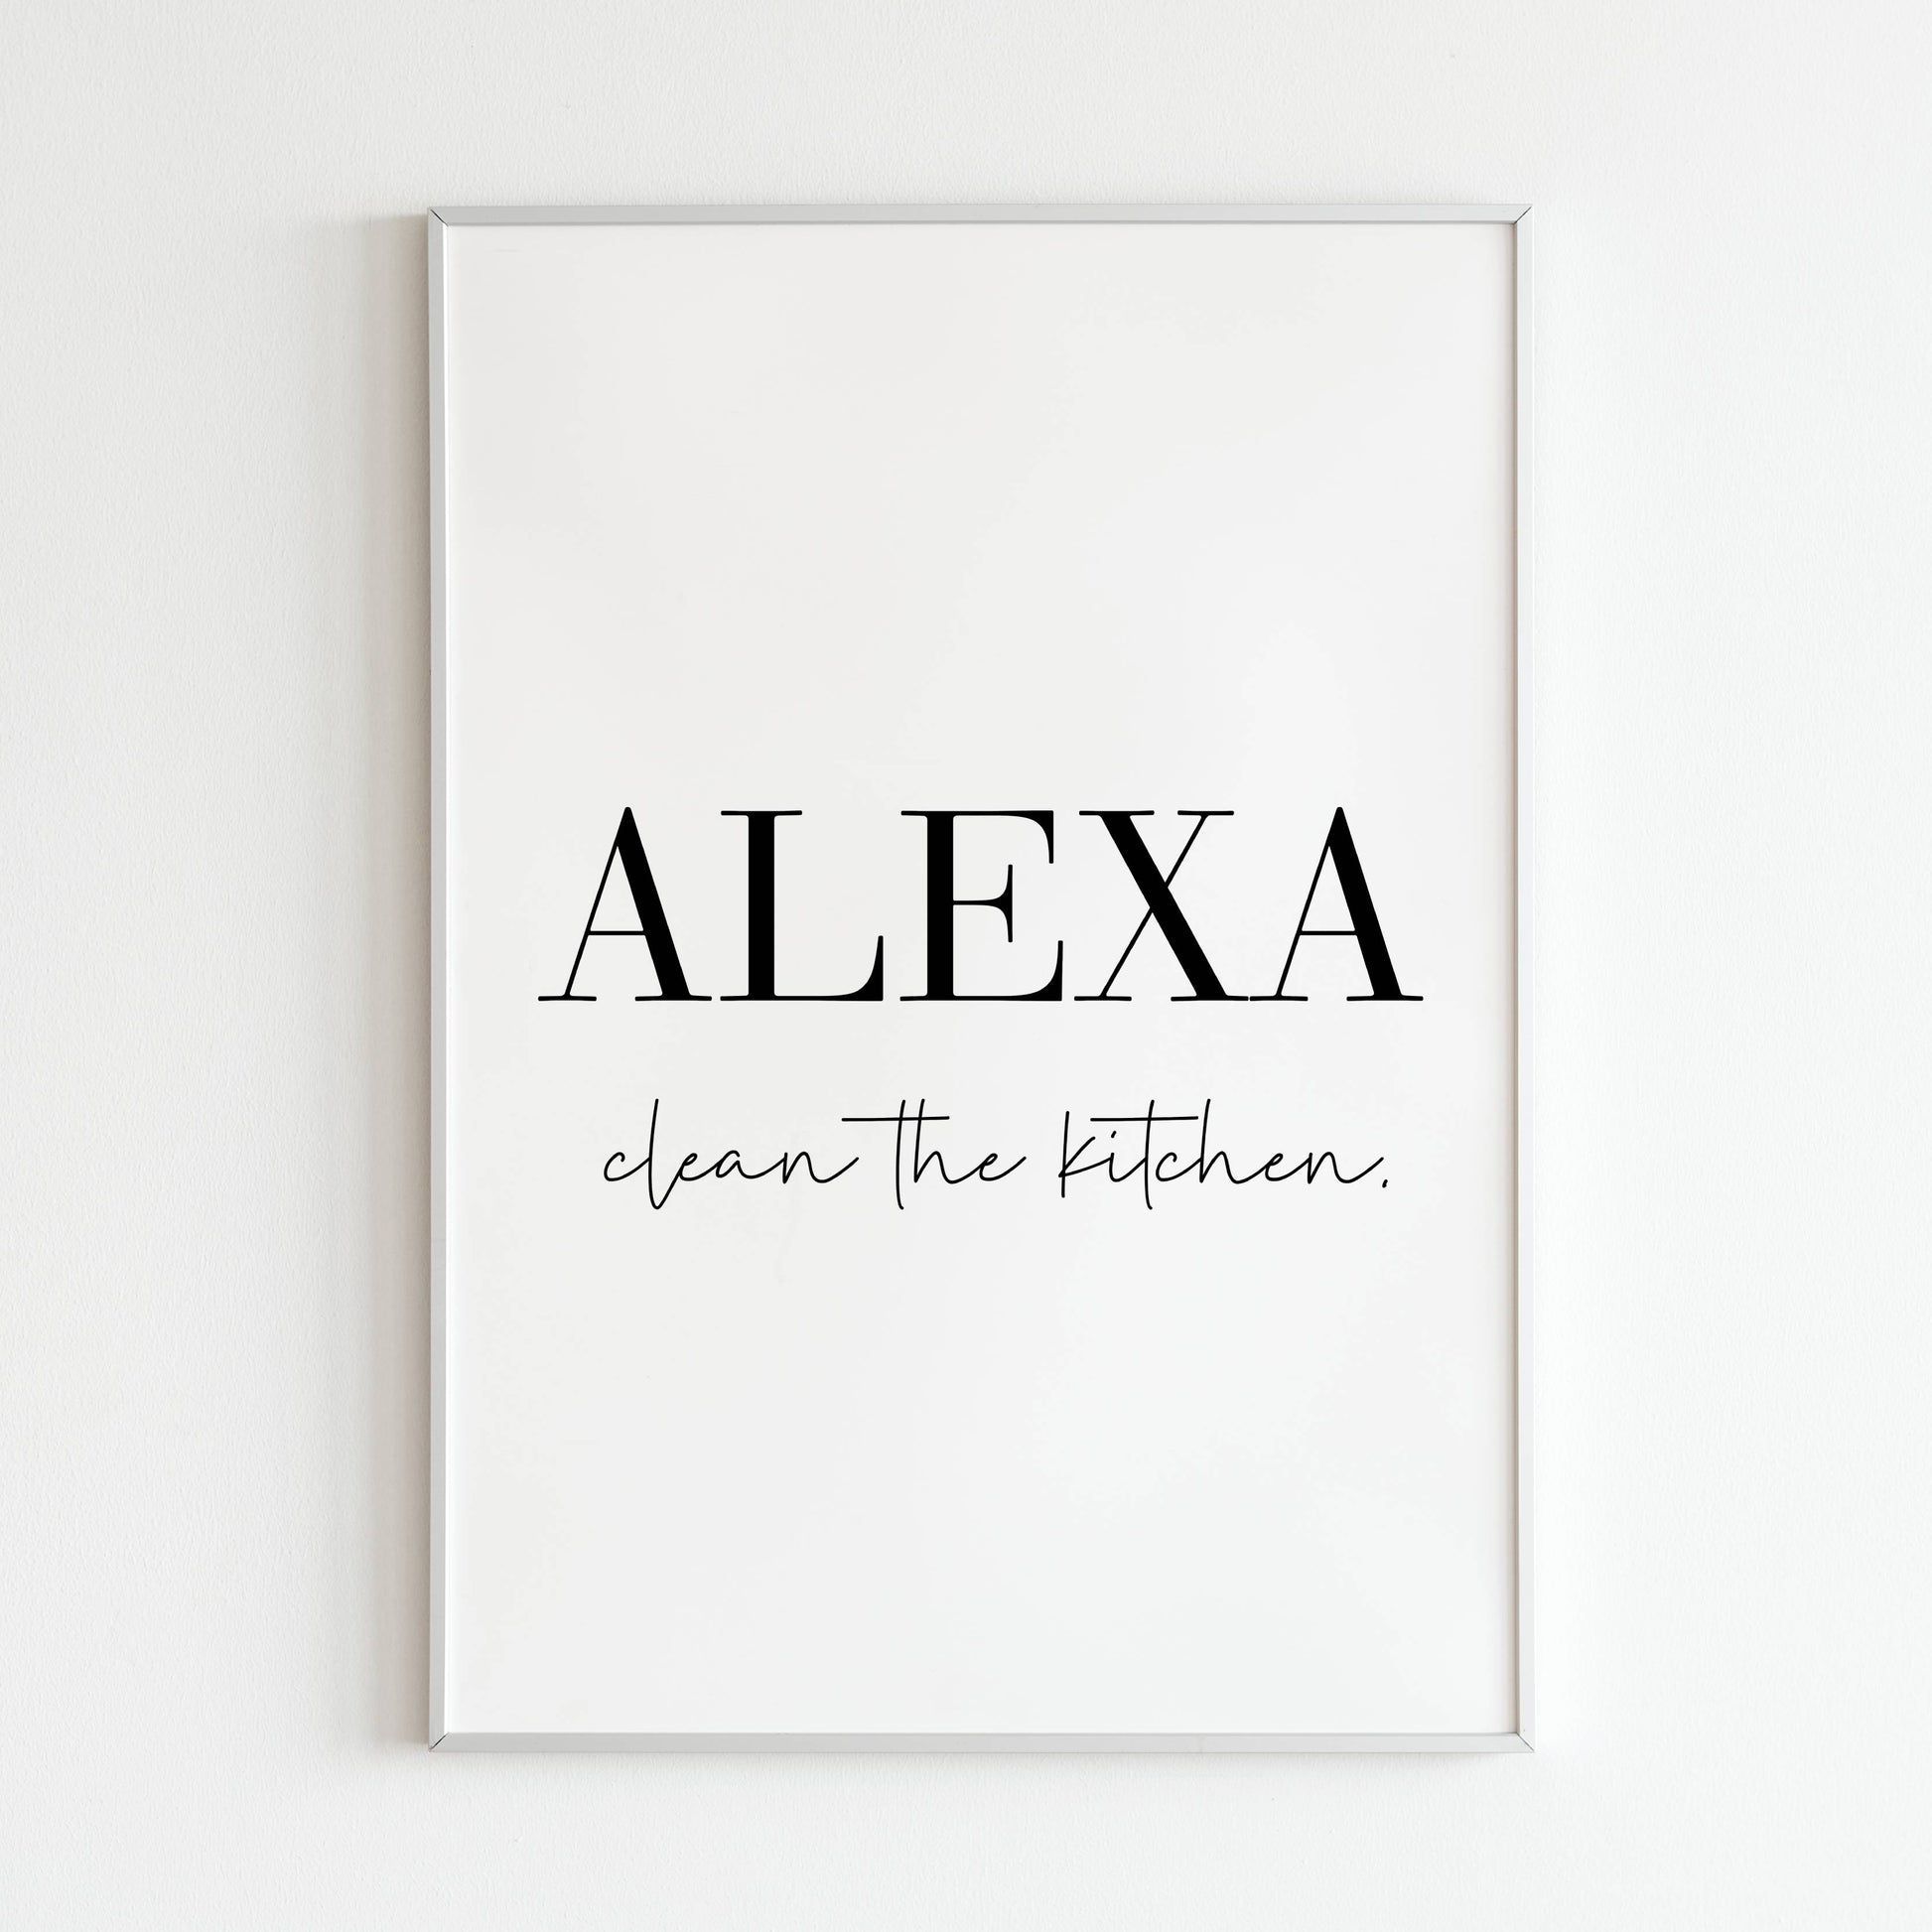 Downloadable "ALEXA, clean the kitchen" art print, add a chuckle to your chore routine.